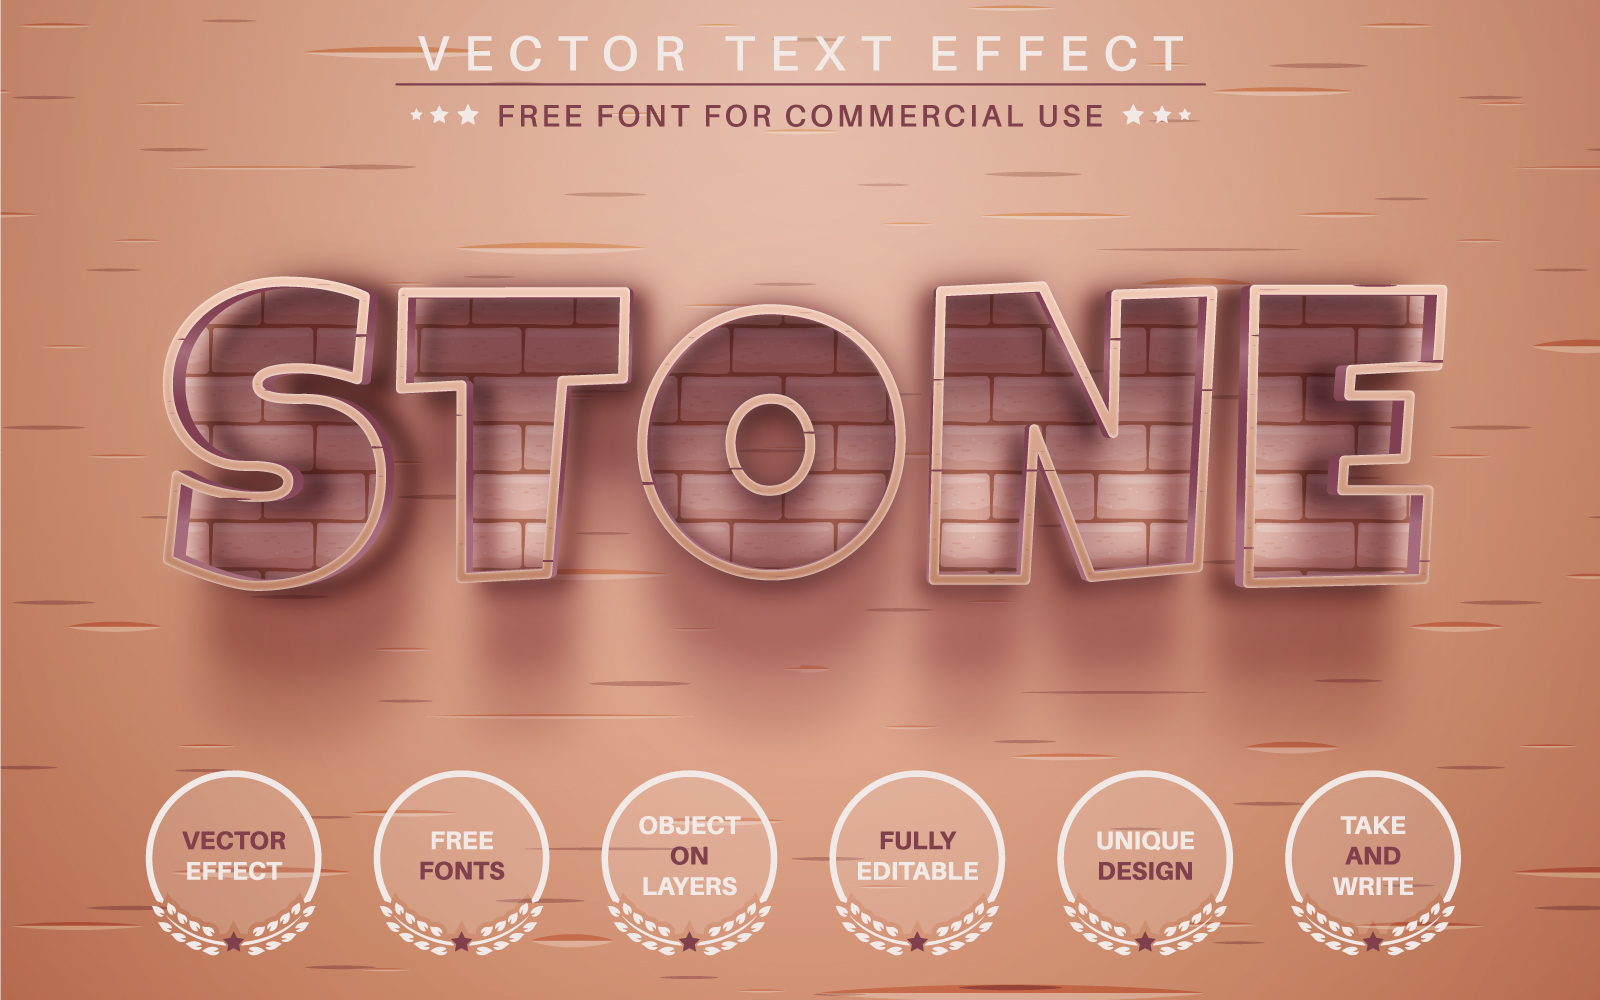 Brick Stone - Editable Text Effect, Font Style, Graphic Illustration